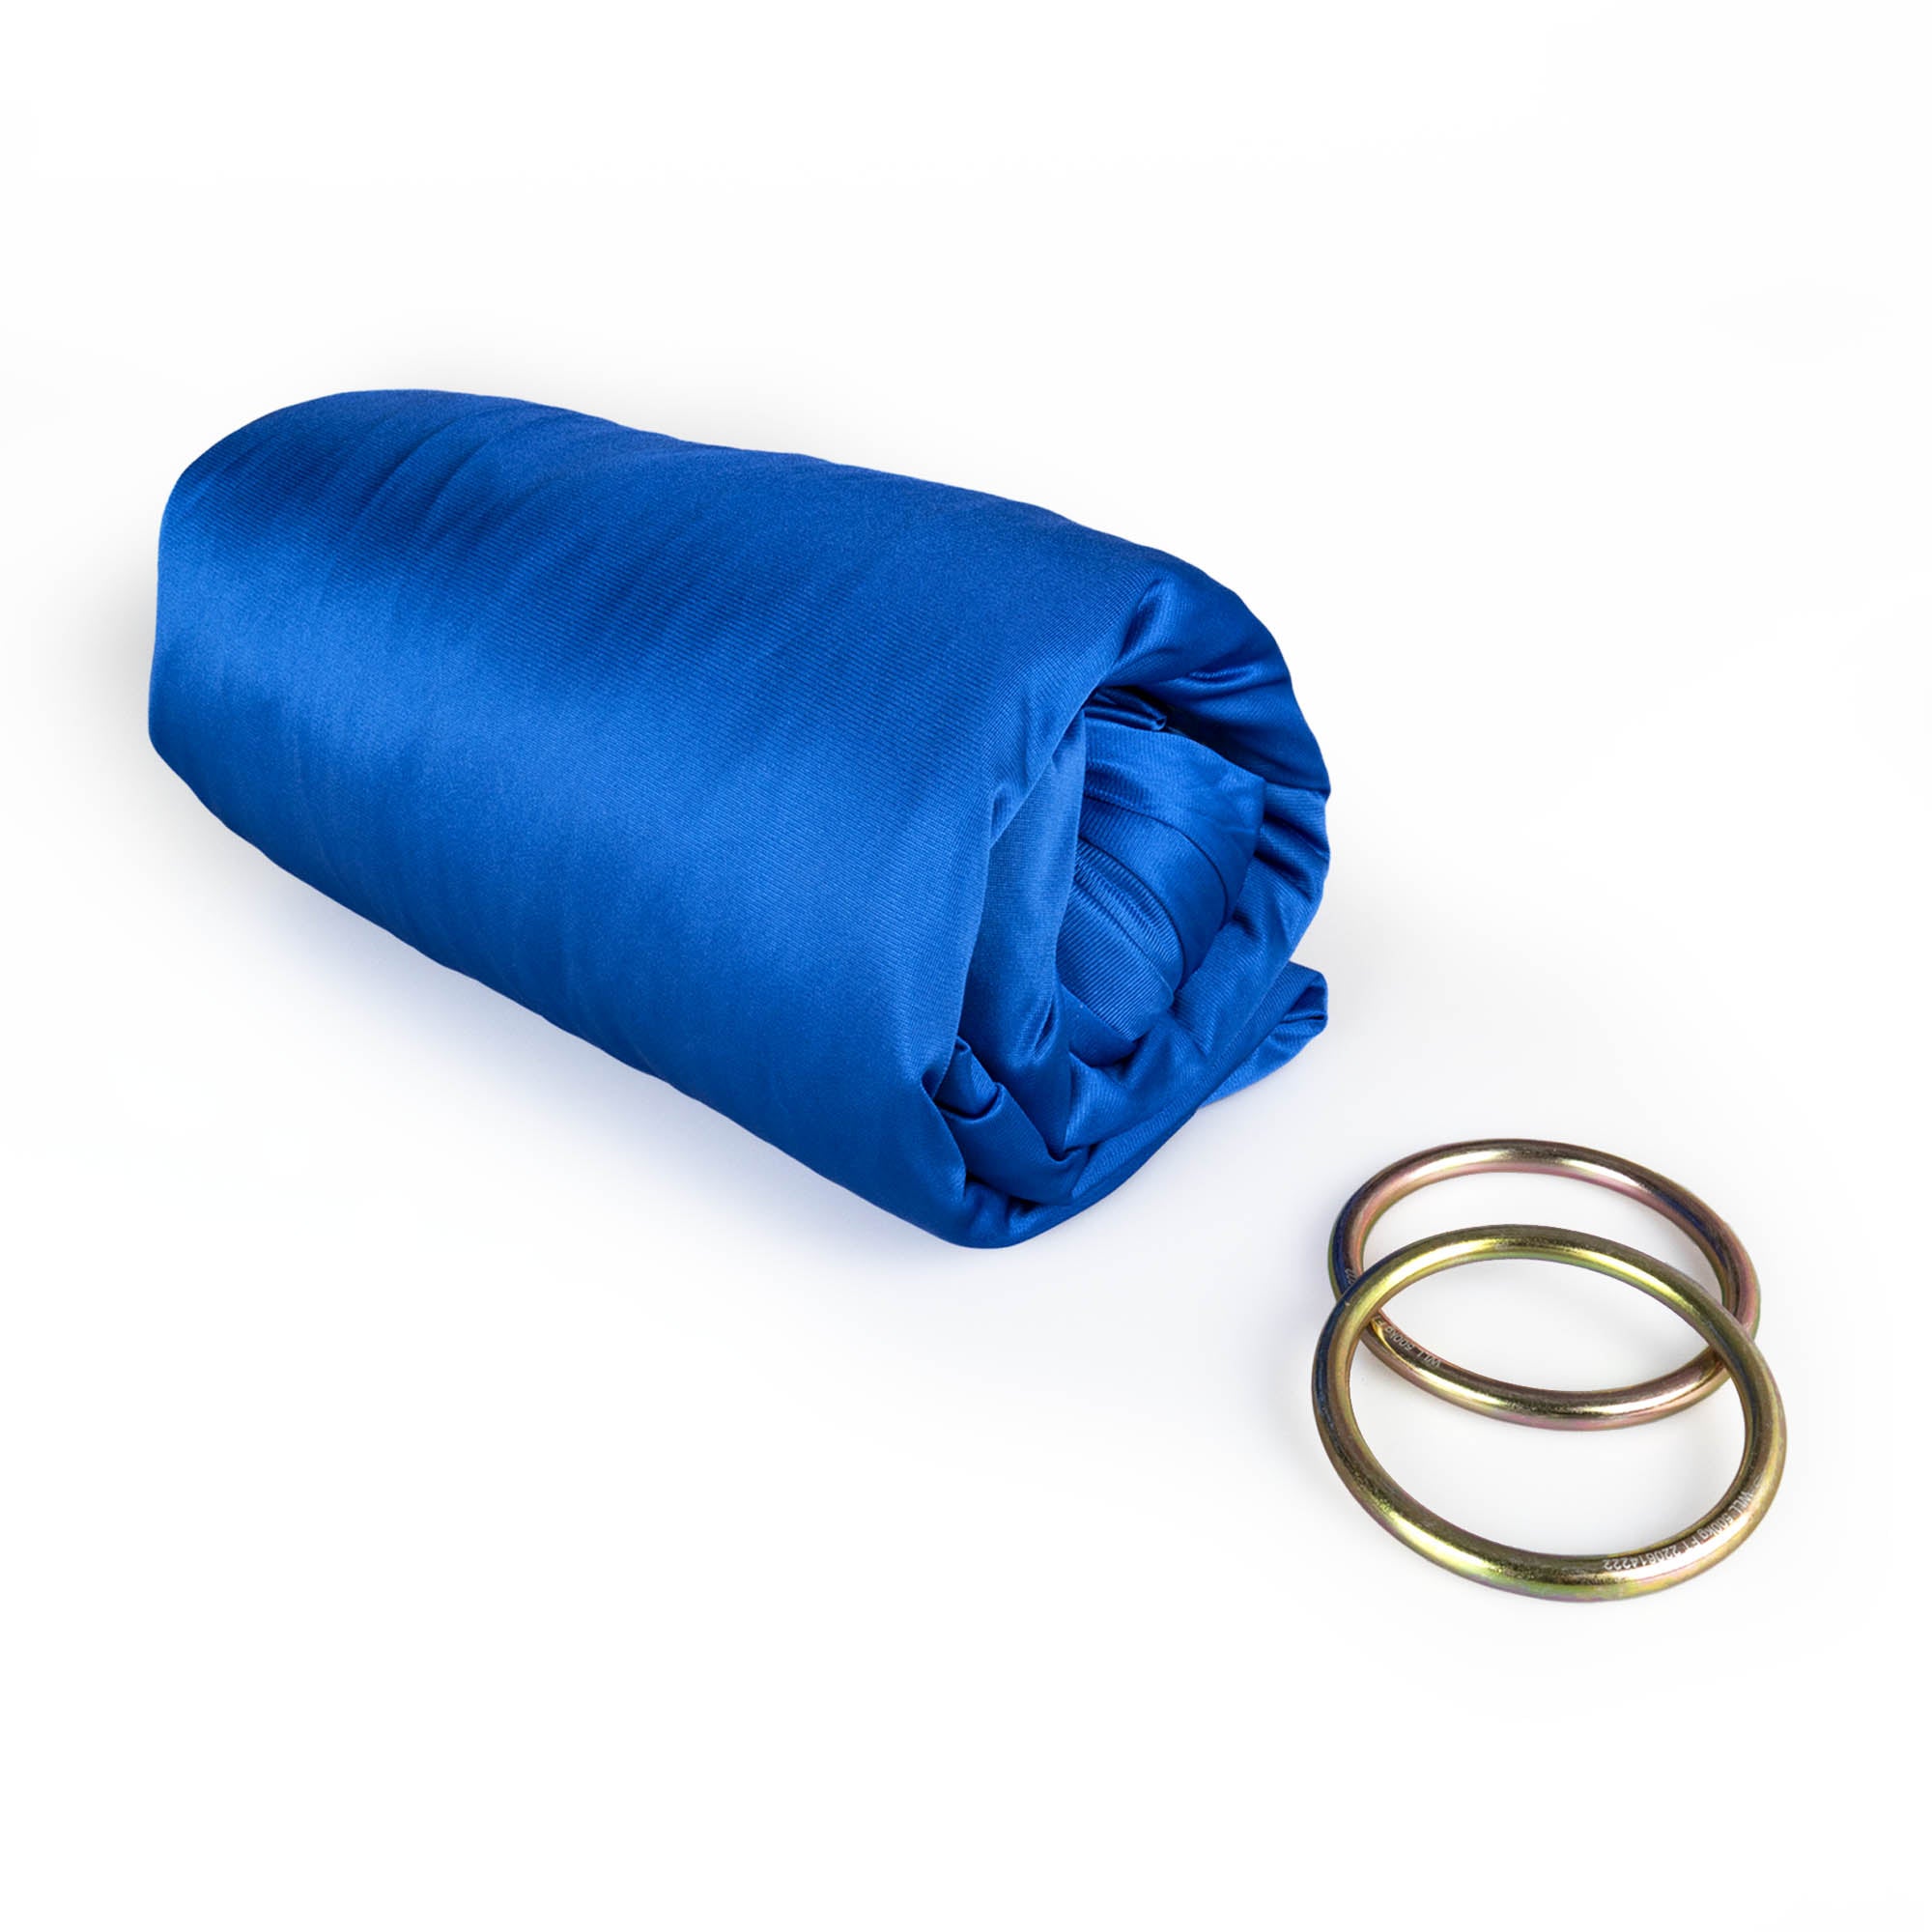 Royal blue yoga hammock rolled up with rings detached